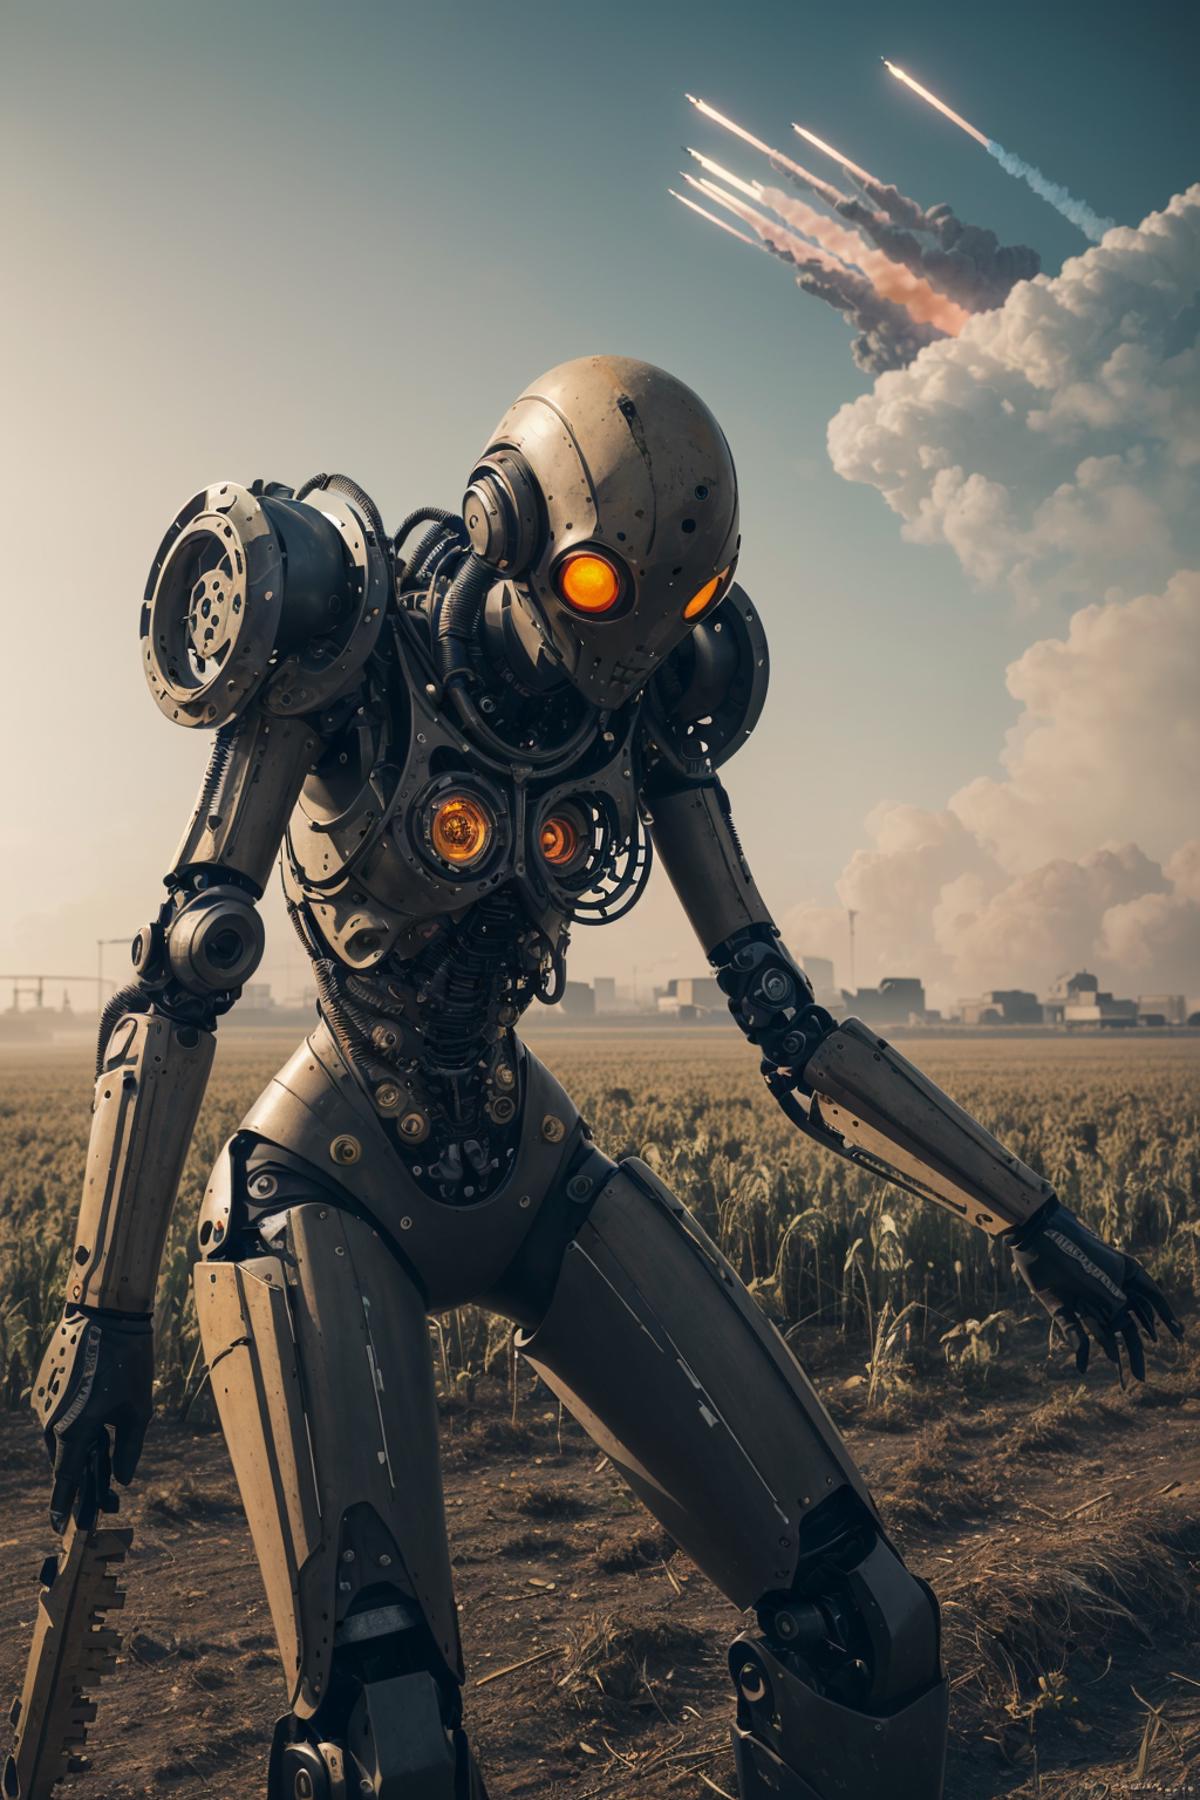 A large robotic figure with glowing eyes stands in a field, surrounded by power plants and industrial machinery.